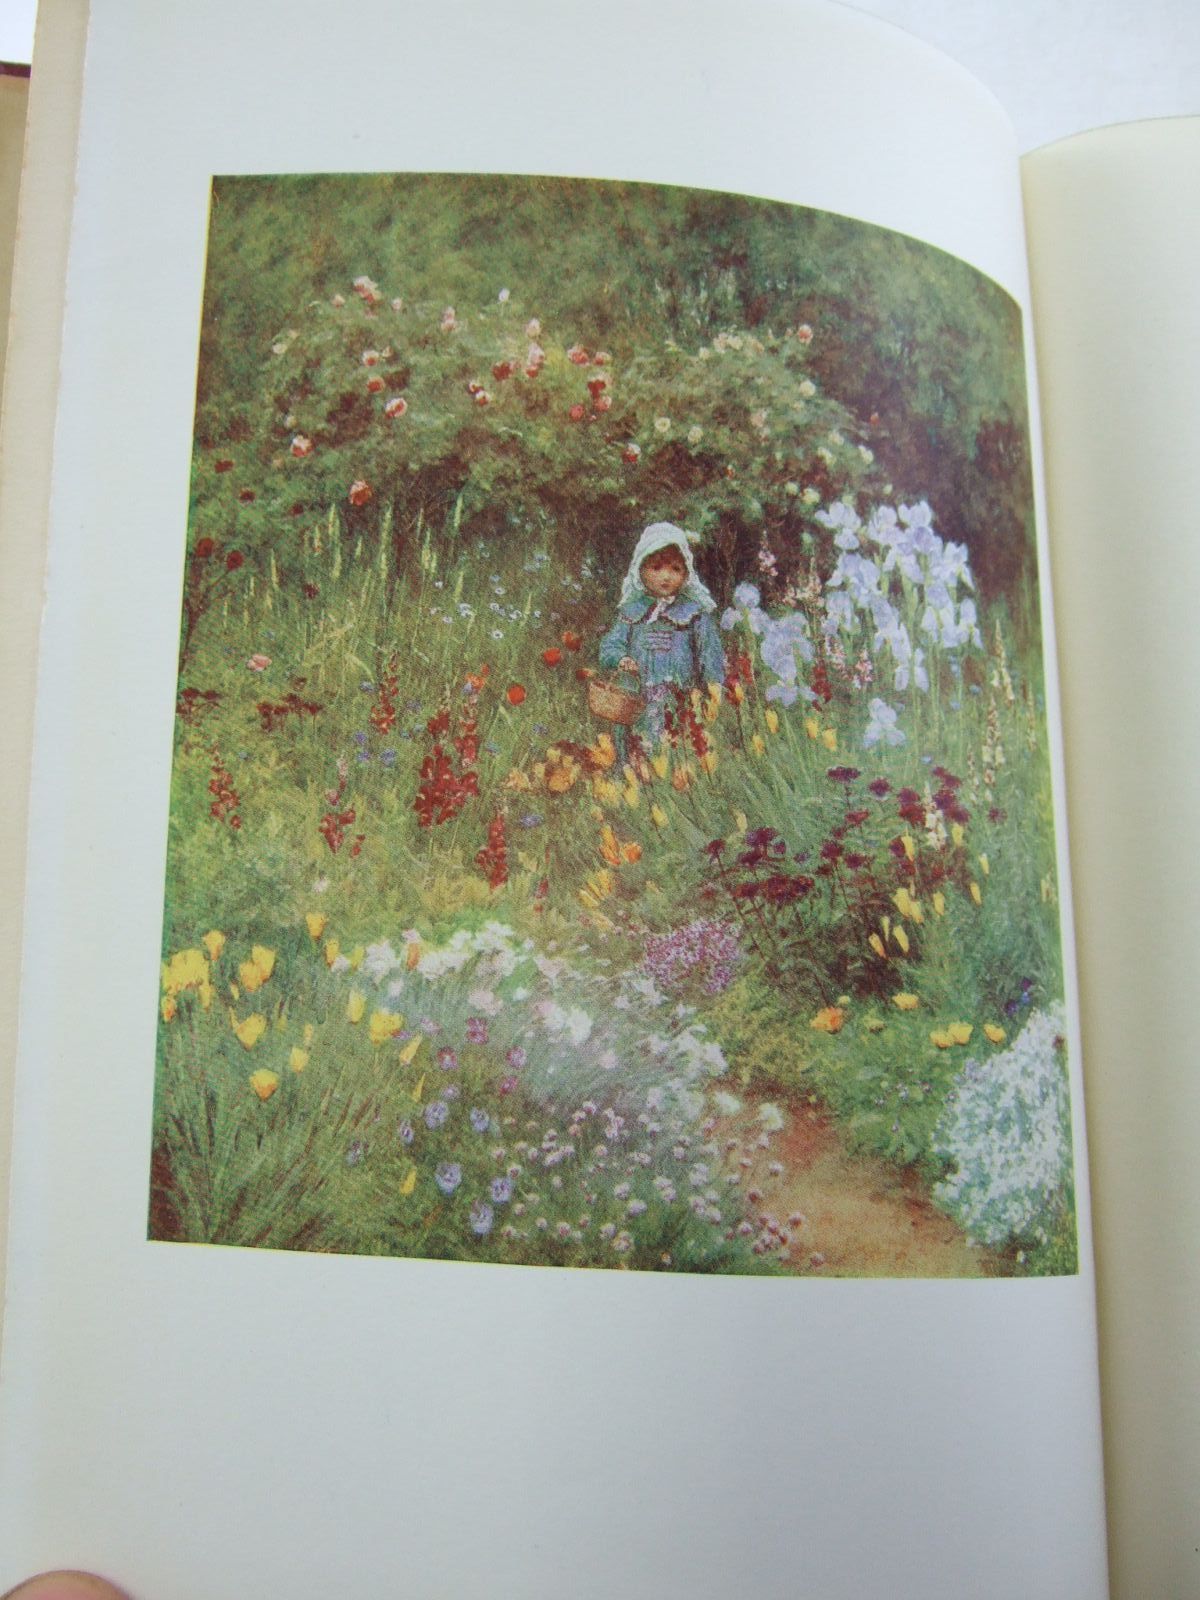 Photo of HAPPY ENGLAND written by Huish, Marcus B. illustrated by Allingham, Helen published by Adam & Charles Black (STOCK CODE: 2107921)  for sale by Stella & Rose's Books